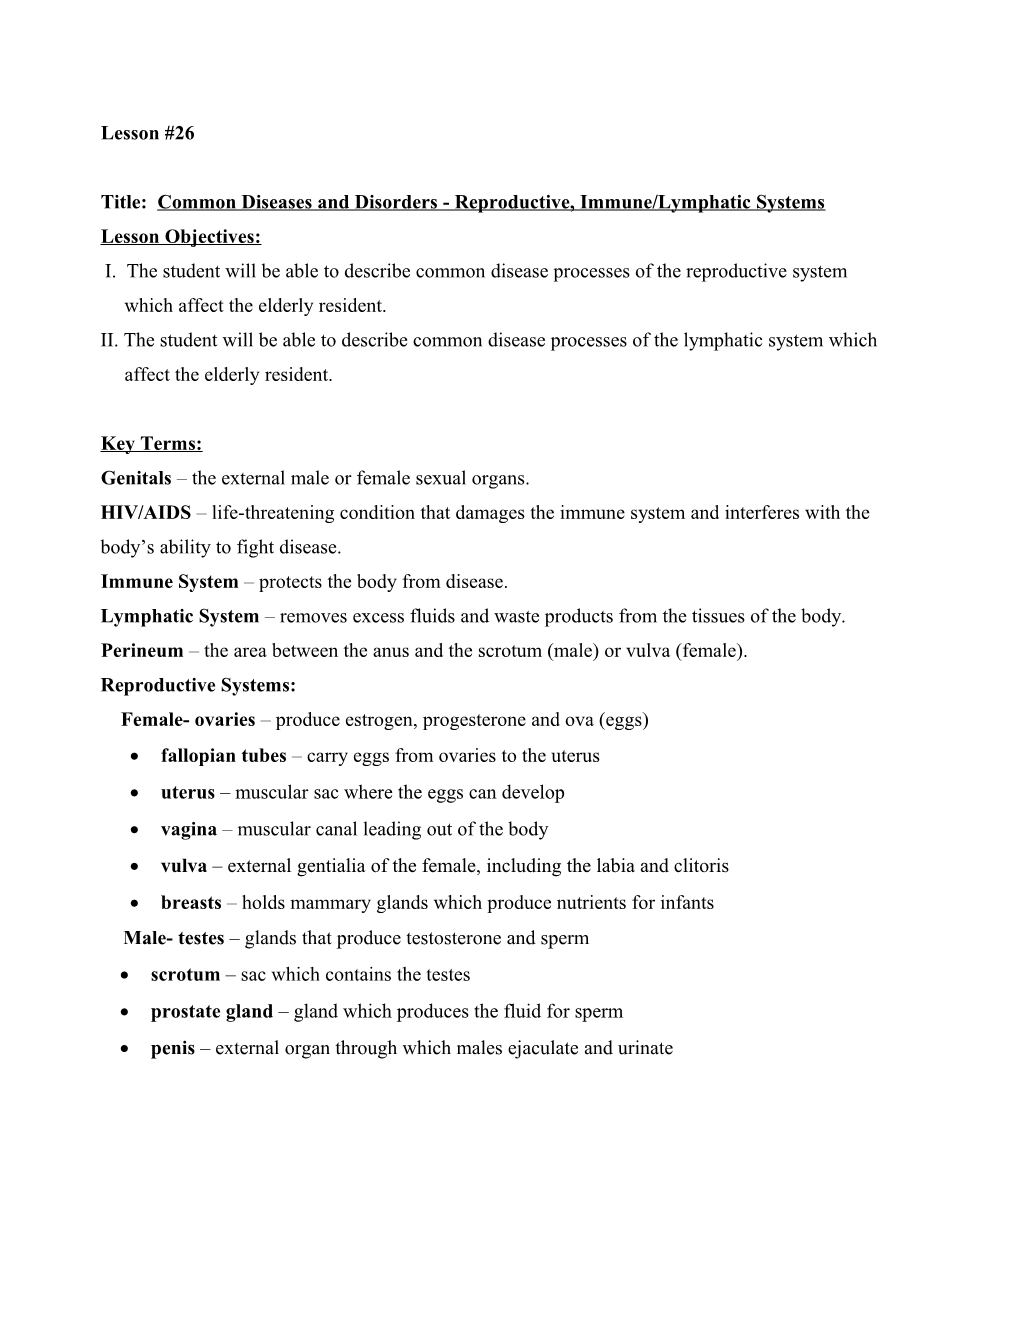 Title: Common Diseases and Disorders - Reproductive, Immune/Lymphatic Systems